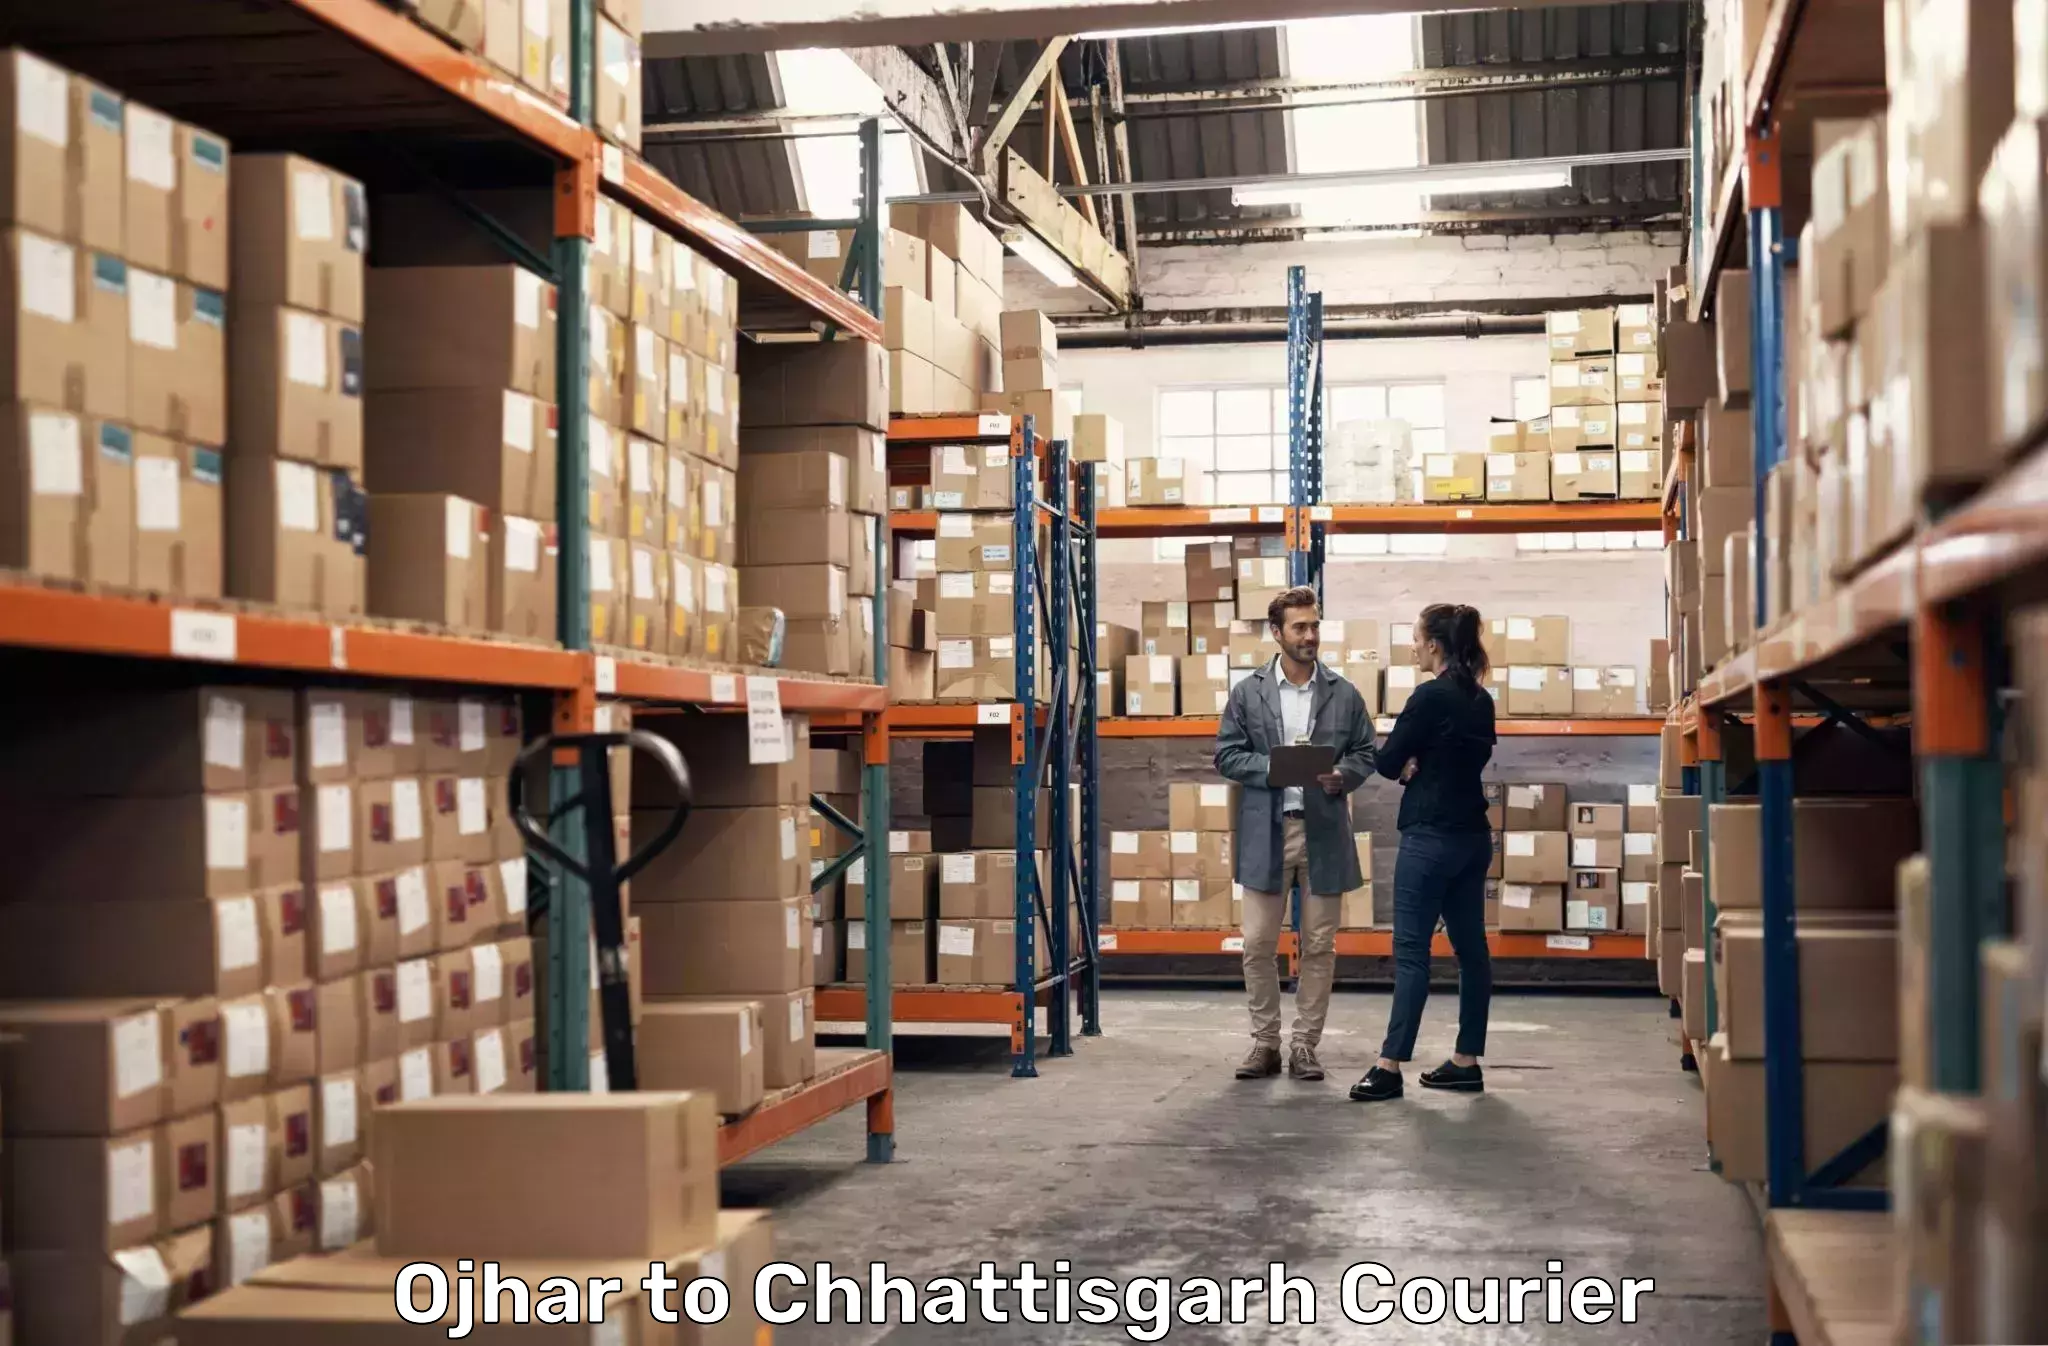 Reliable courier service Ojhar to bagbahra